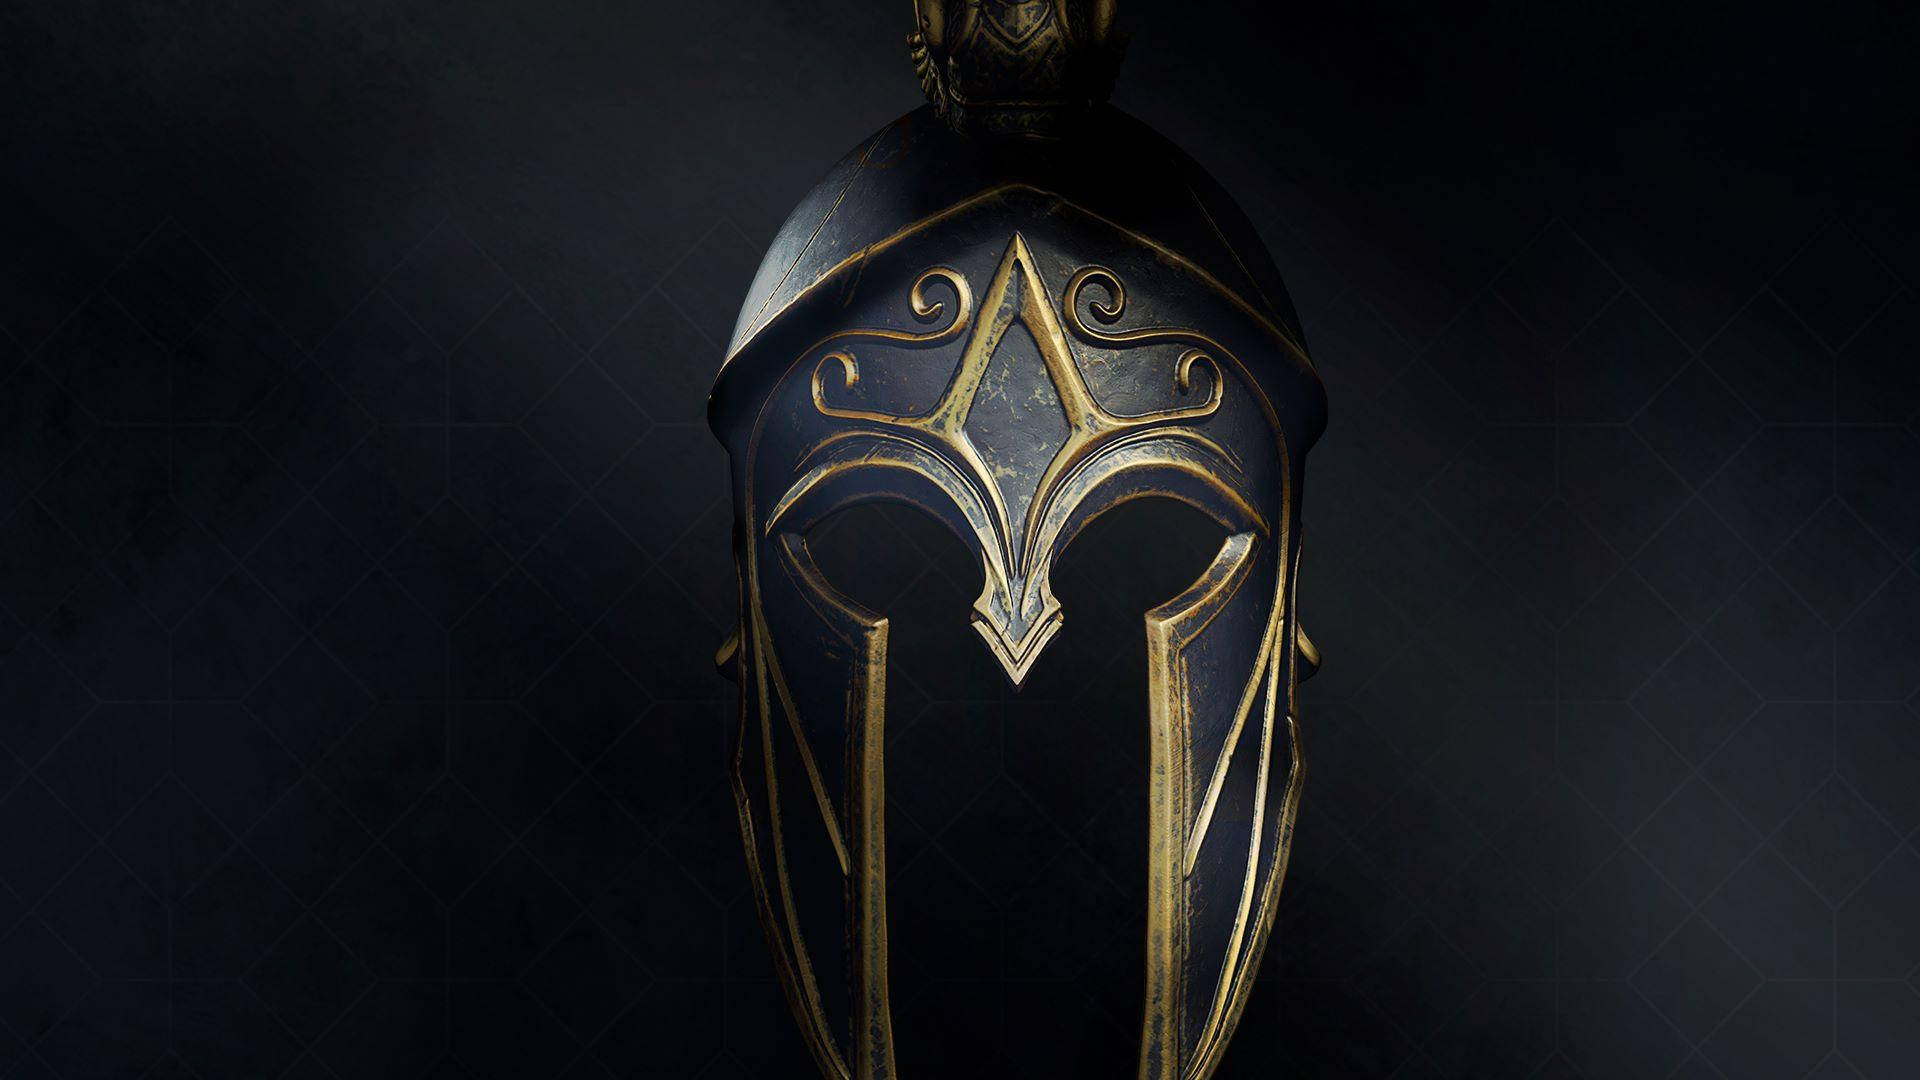 Free Assassin's Creed Odyssey Wallpaper Downloads, [100+] Assassin's Creed  Odyssey Wallpapers for FREE 